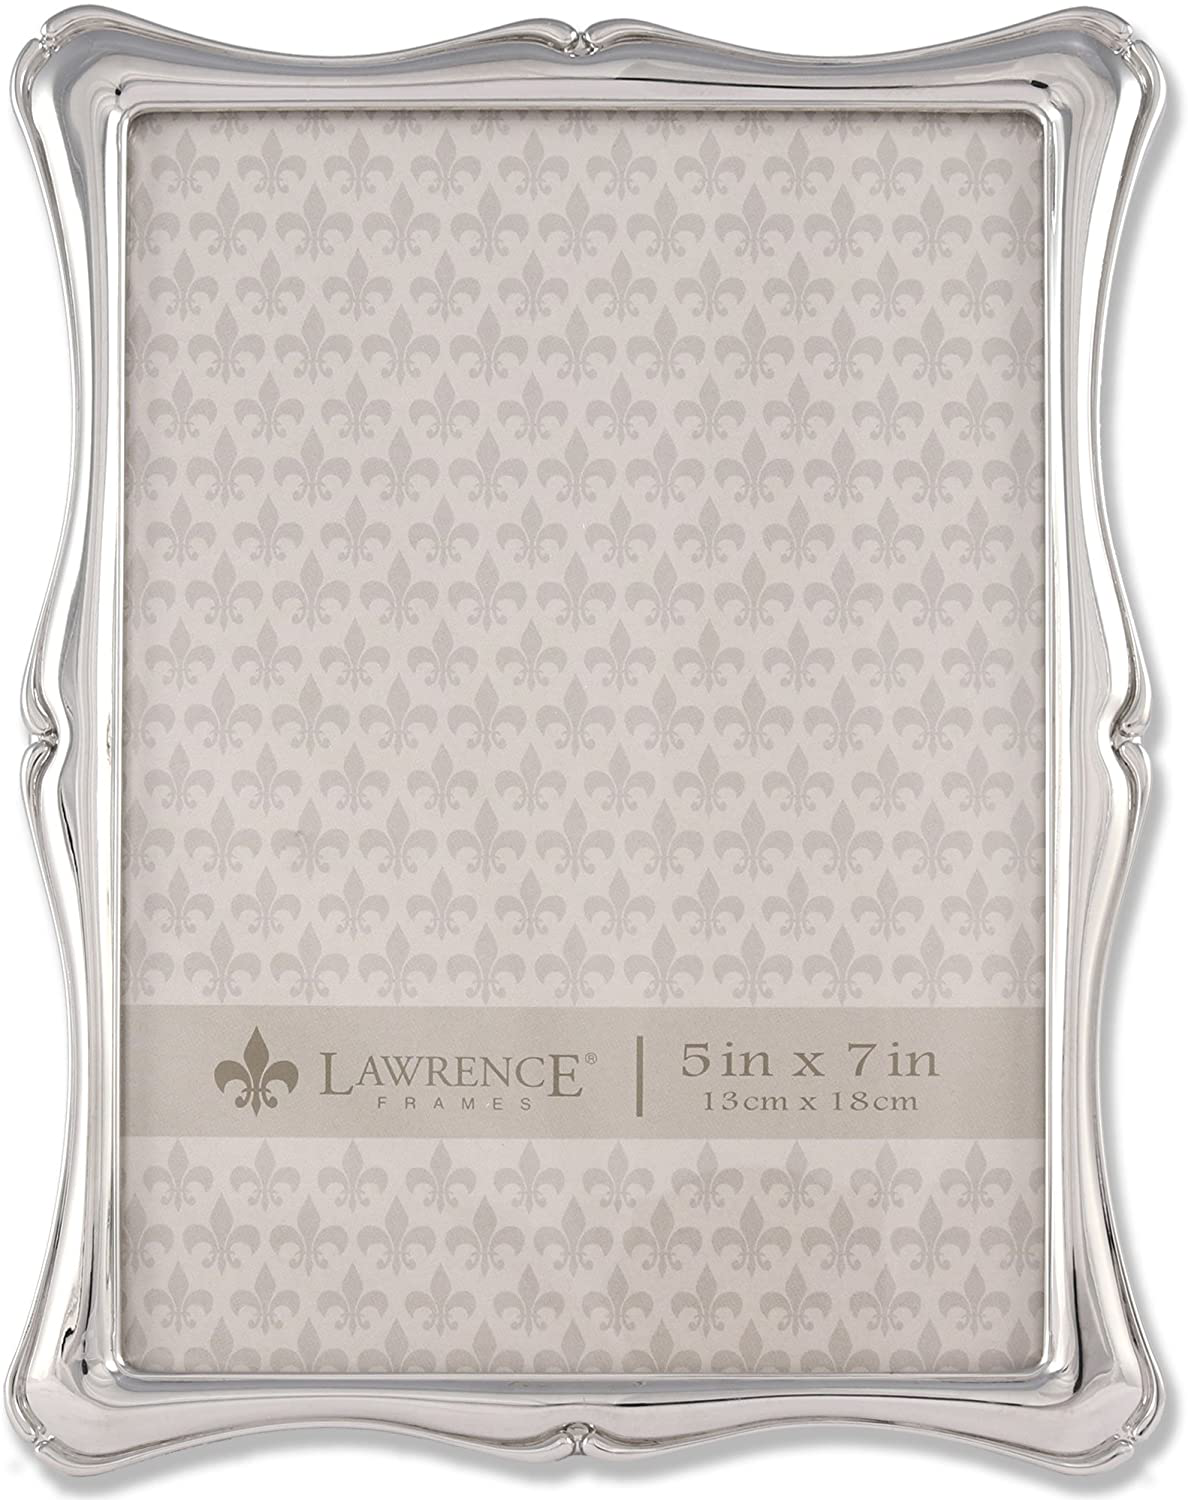 Lawrence Frames 710280 5 by 7-Inch Silver Metal Romance Picture Frame, 8 by 10-Inch Matted